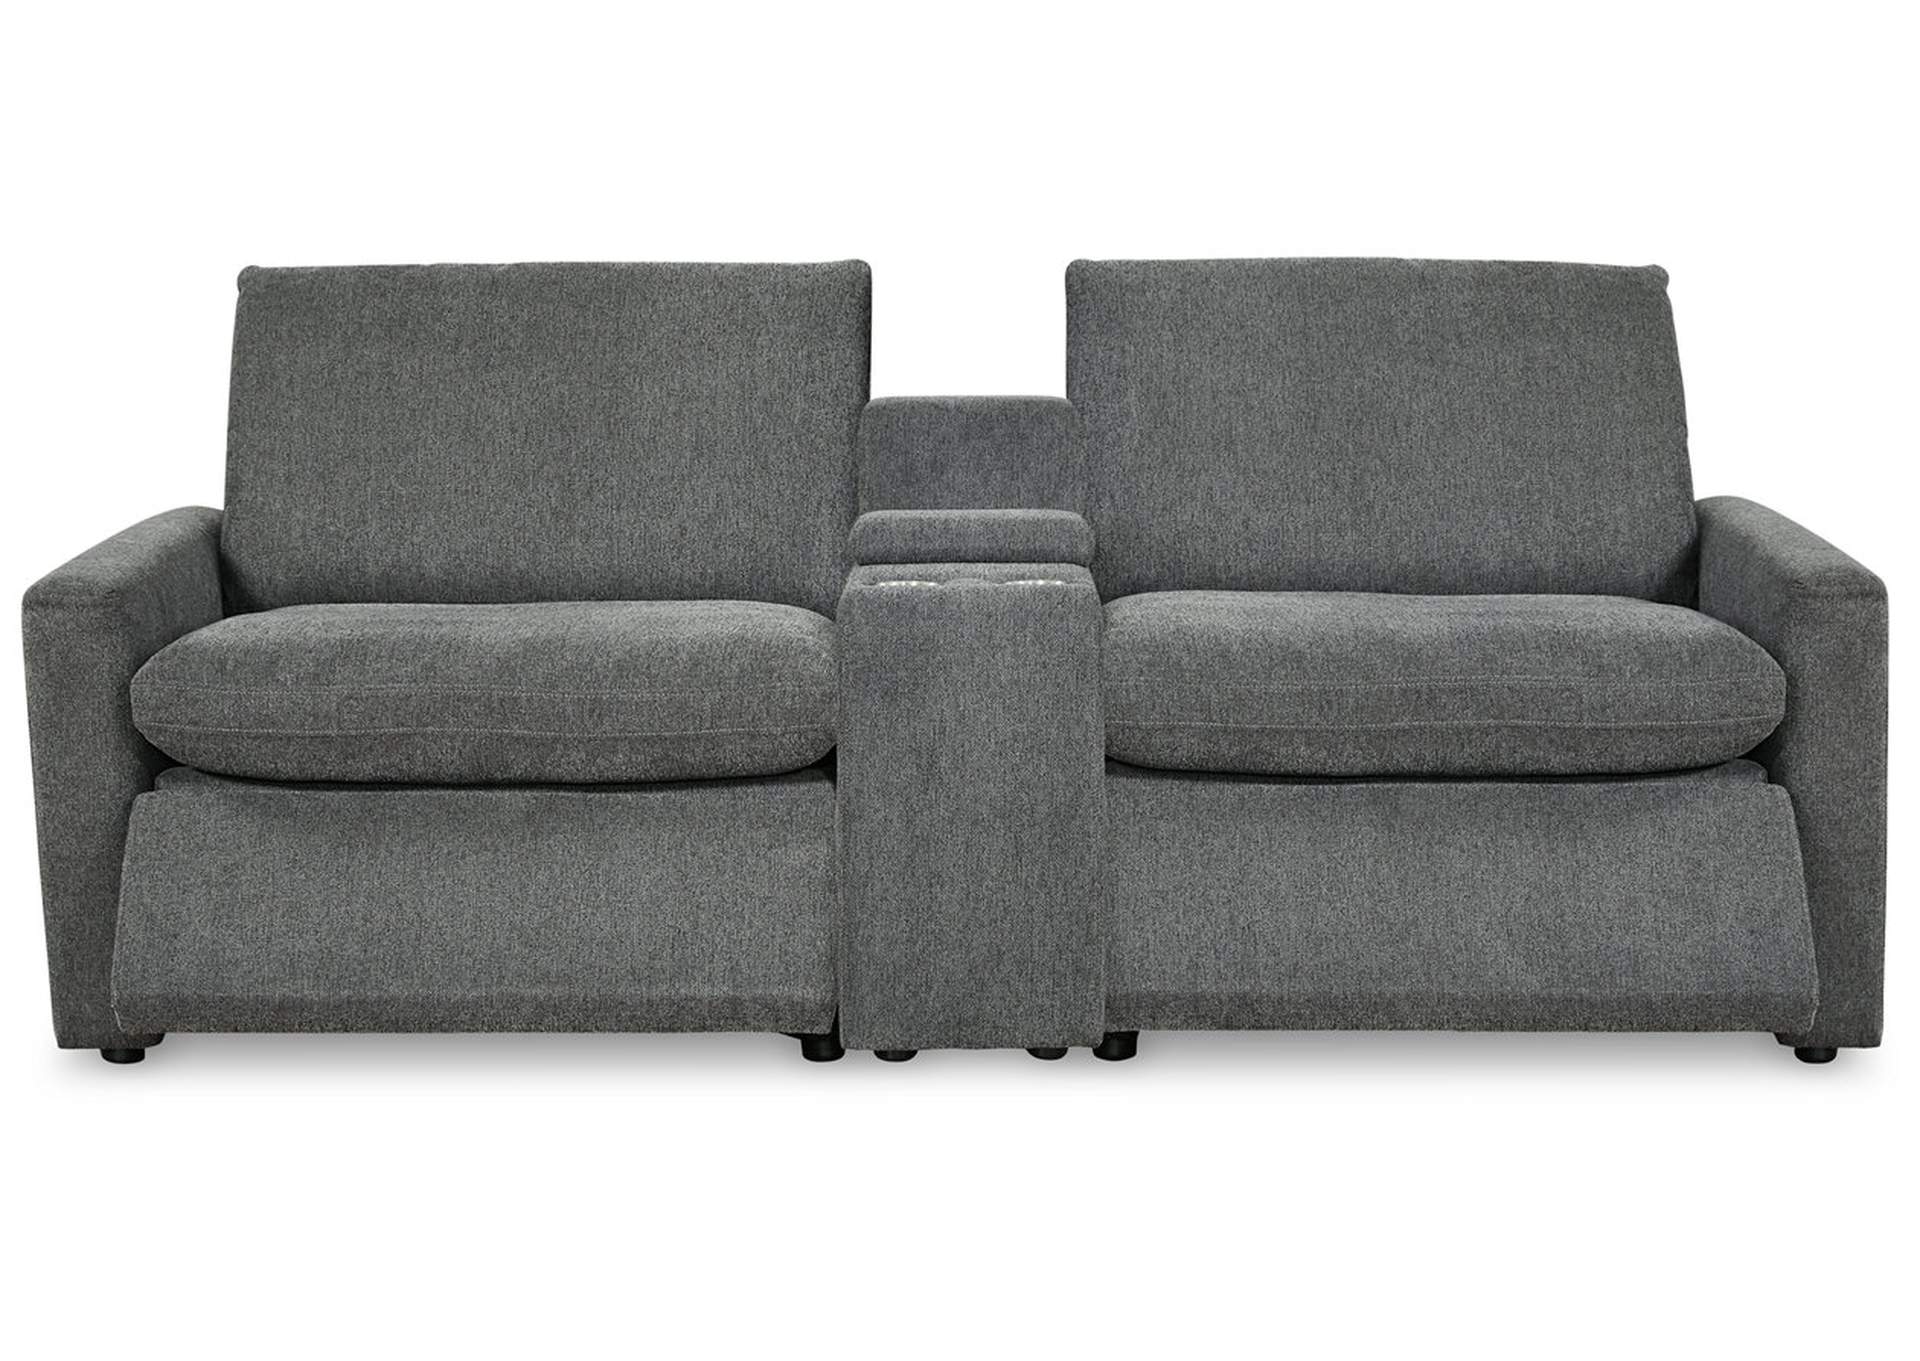 Hartsdale 3-Piece Power Reclining Sectional Loveseat with Console,Signature Design By Ashley